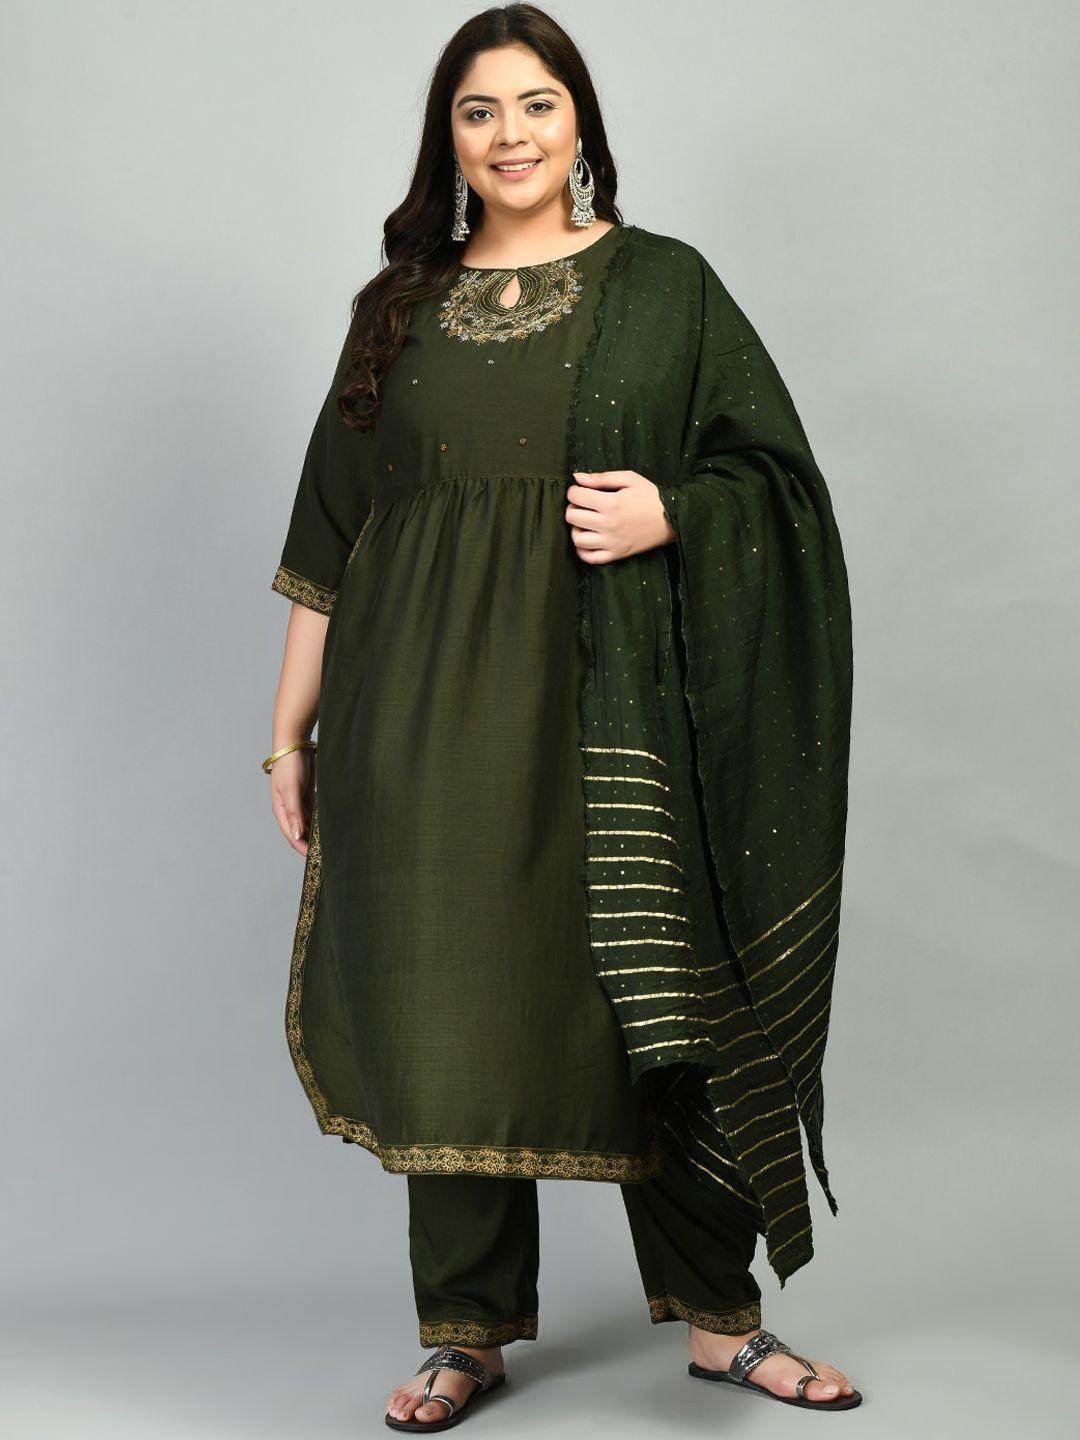 prettyplus by desinoor.com women green floral embroidered kurta with trousers & dupatta